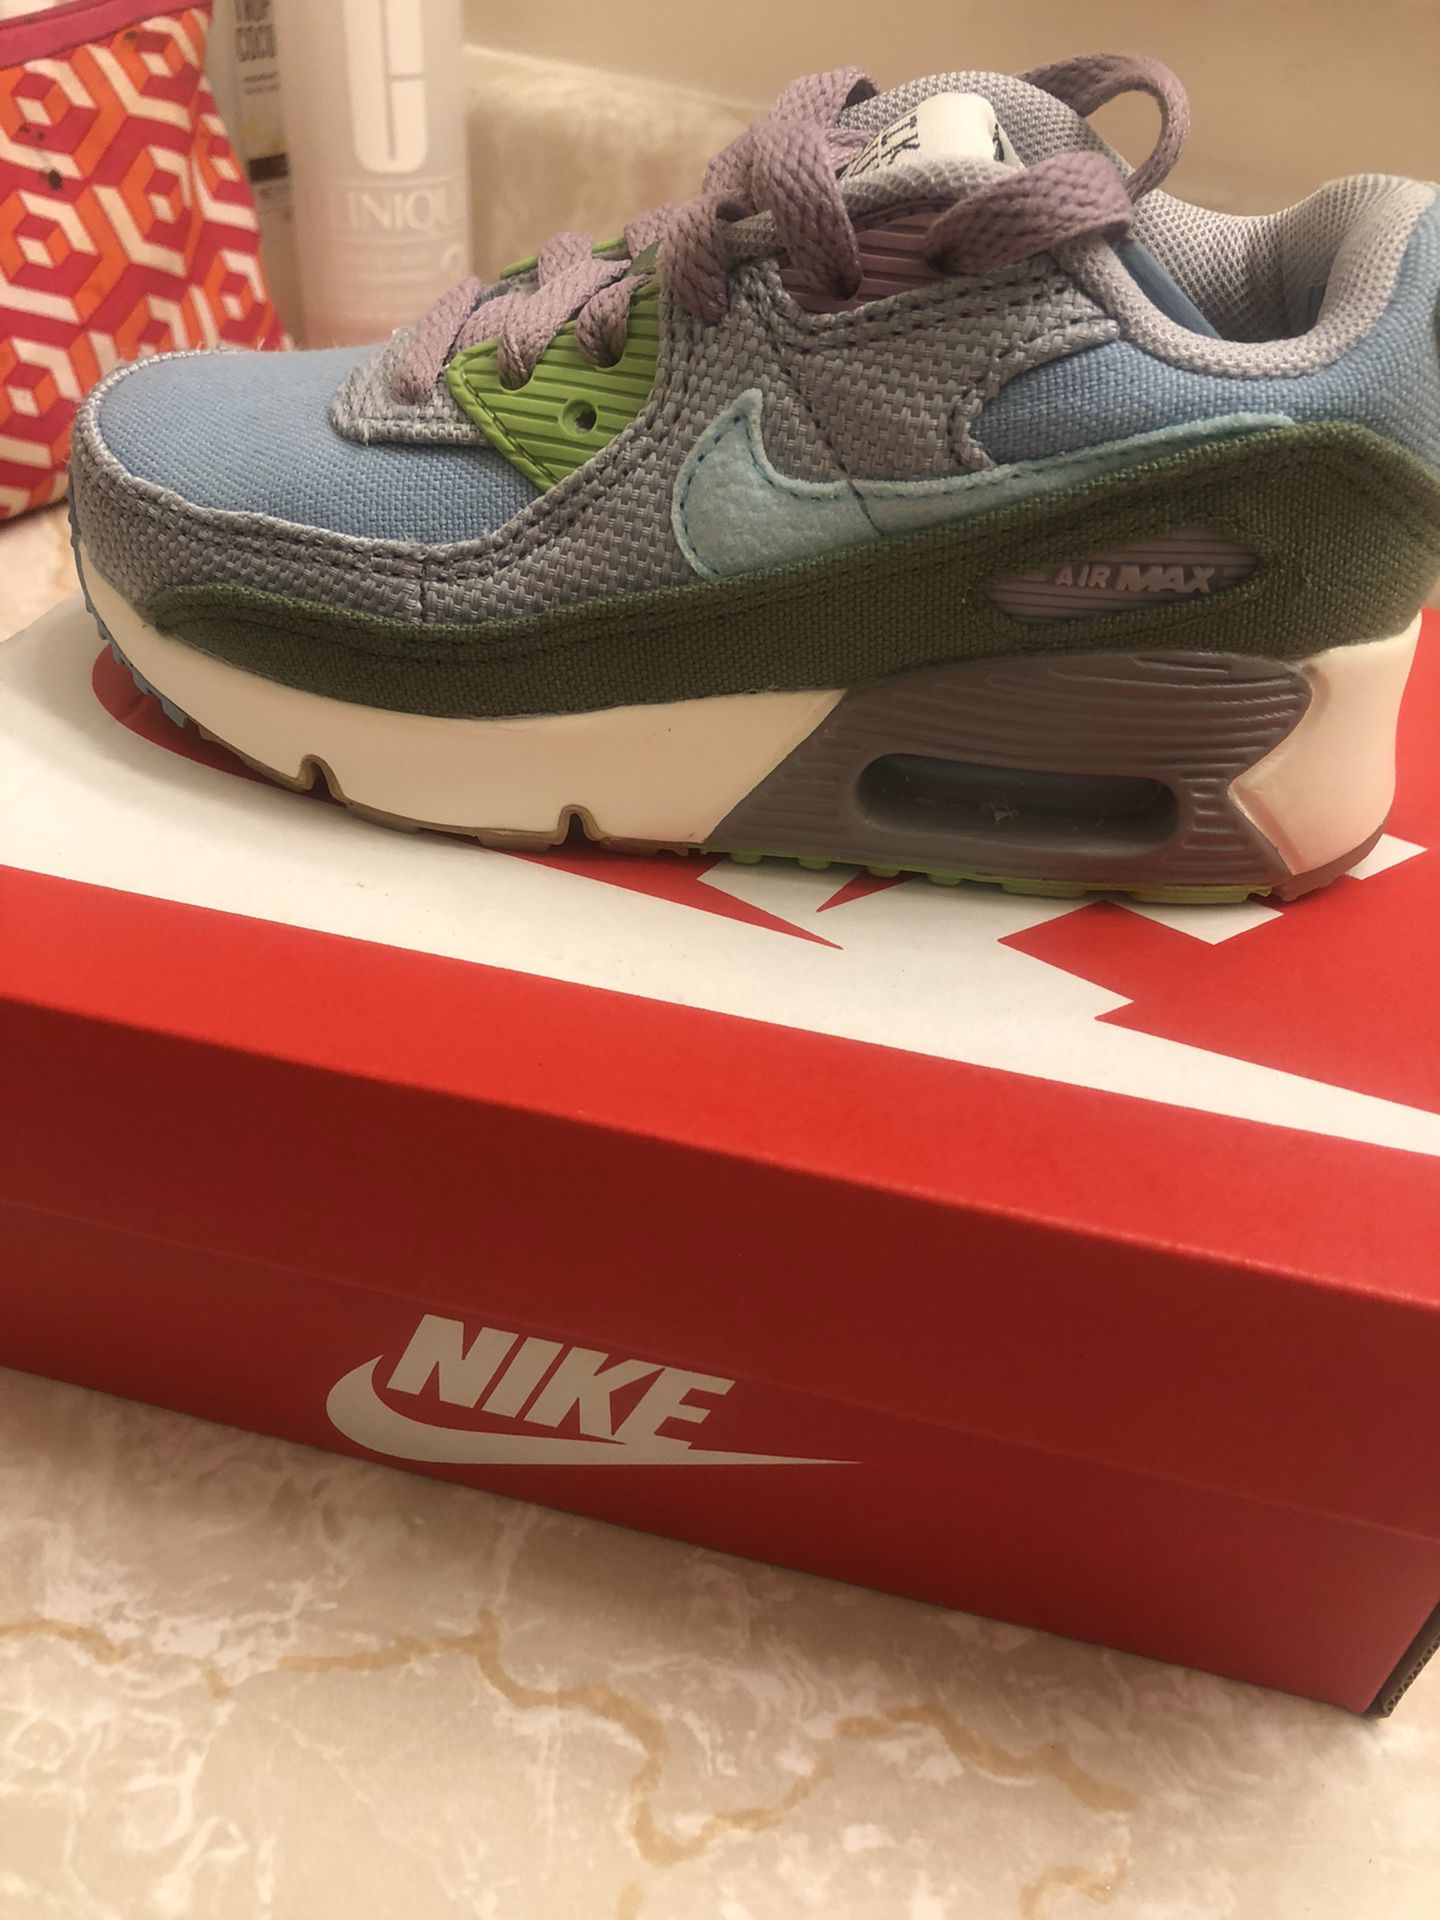 Easter Edition Air Max 90 Toddler Boys Size 11c